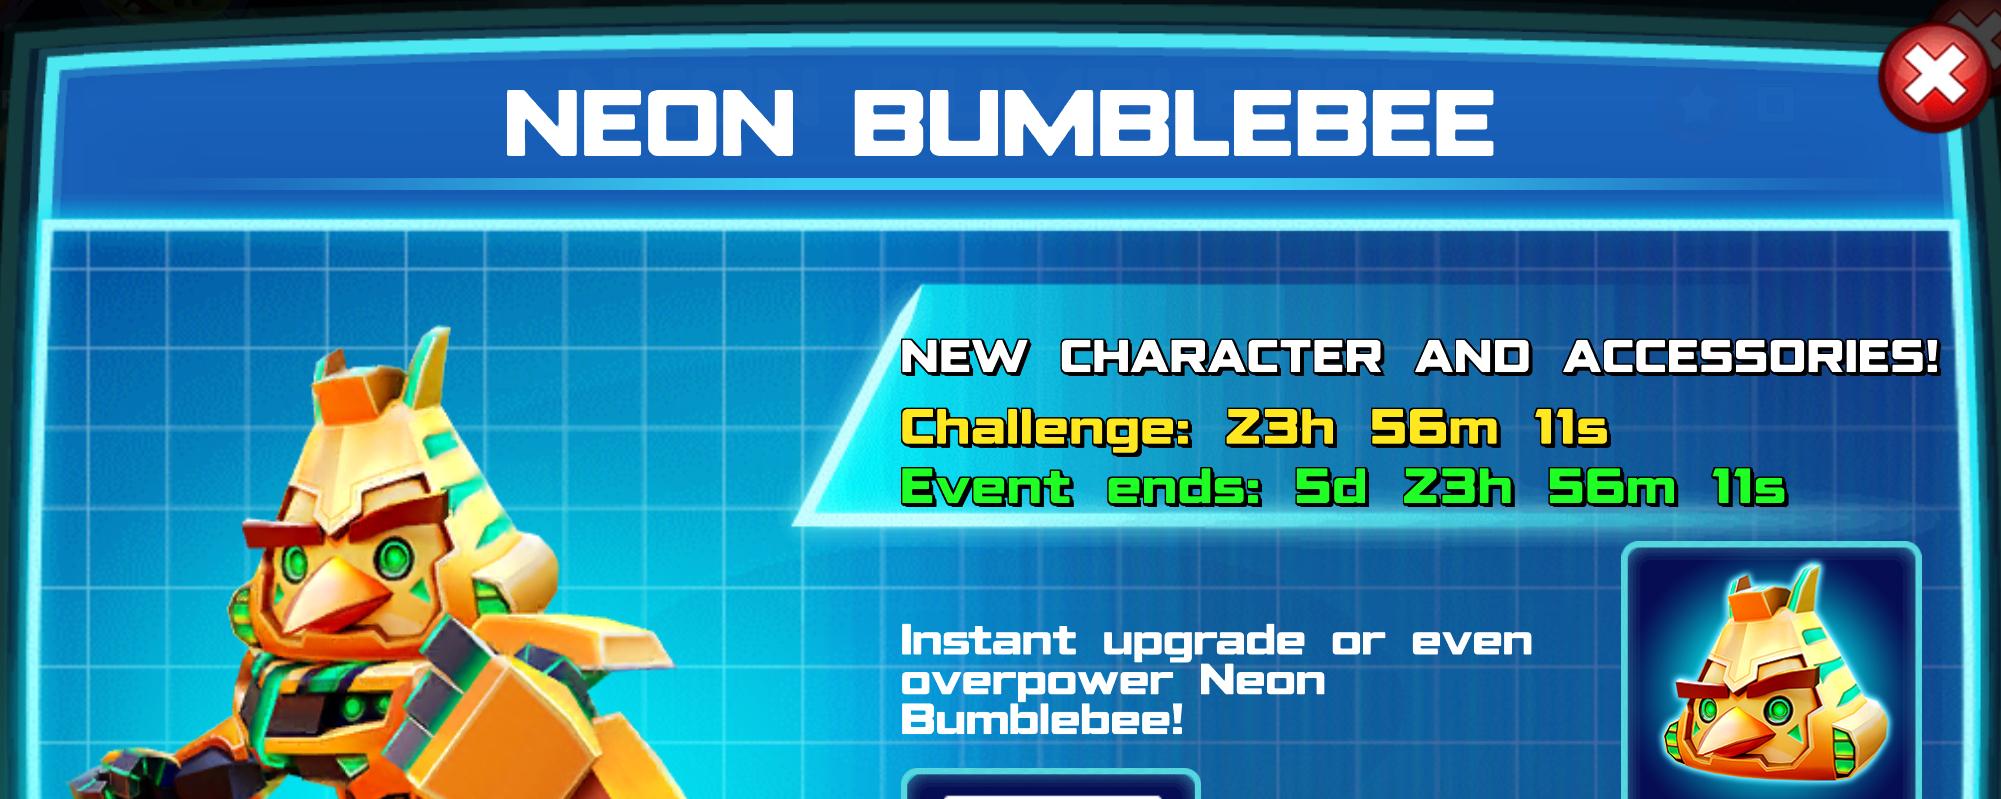 (Part of) The event banner for Neon Bumblebee